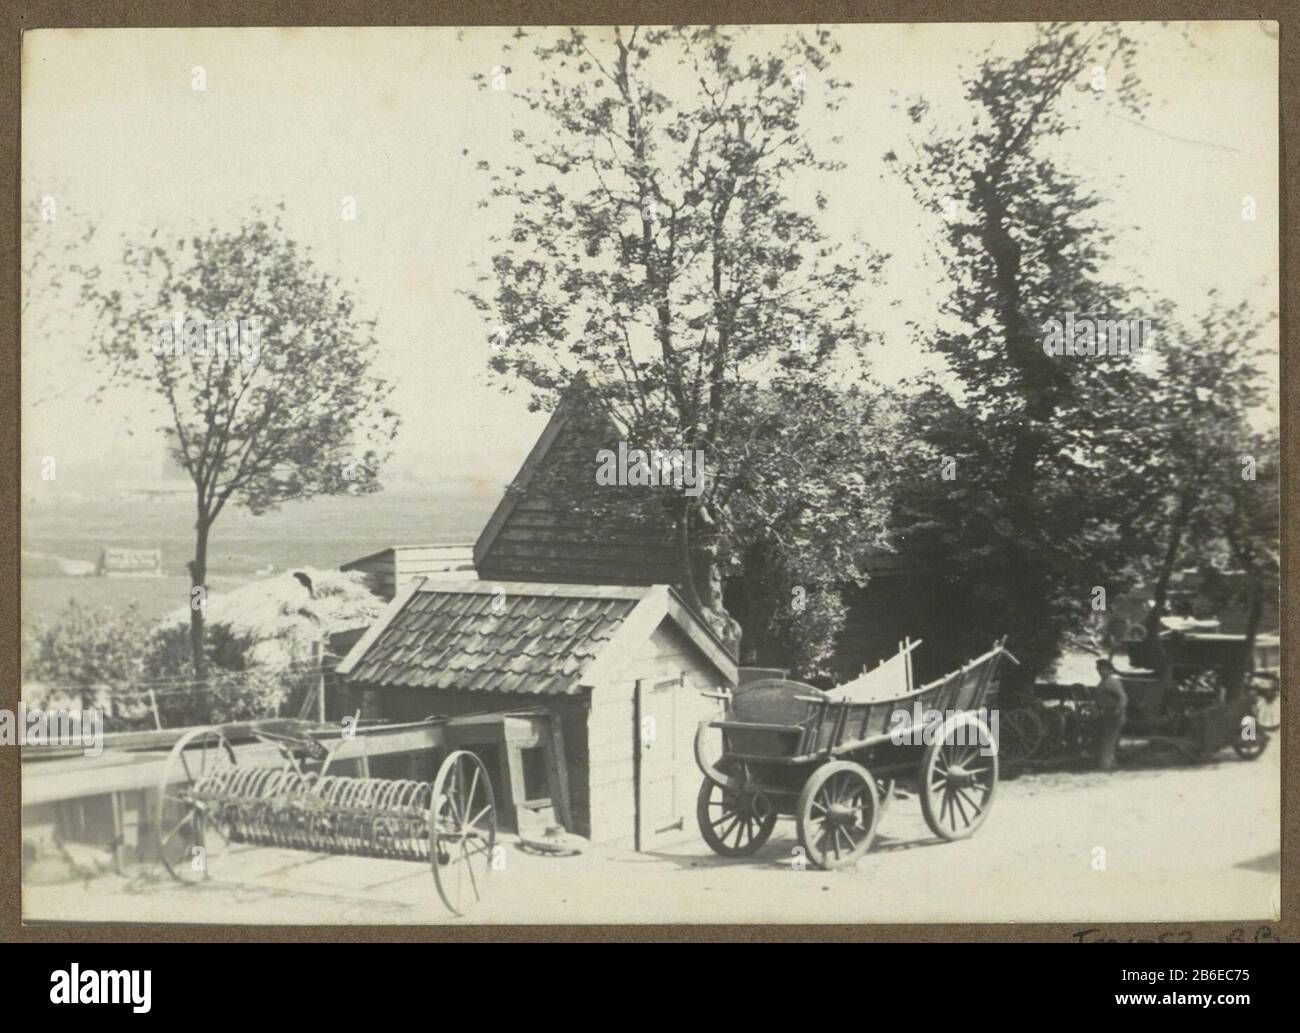 Farm with a cart and to an agricultural machine Sloterdijk Part of album with pictures of Amsterdam and omge. Manufacturer : Photographer: anonymous place manufacture: Sloterdijk Date: 1910 - approx 1930 Physical features: gelatin silver print material: paper photo paper Technique: ontwikkelgelatinezilverdruk Subject: farm or solitary house in landscape farm (building) (farm) wagon, freight wagon, cart where: Sloterdijk Stock Photo